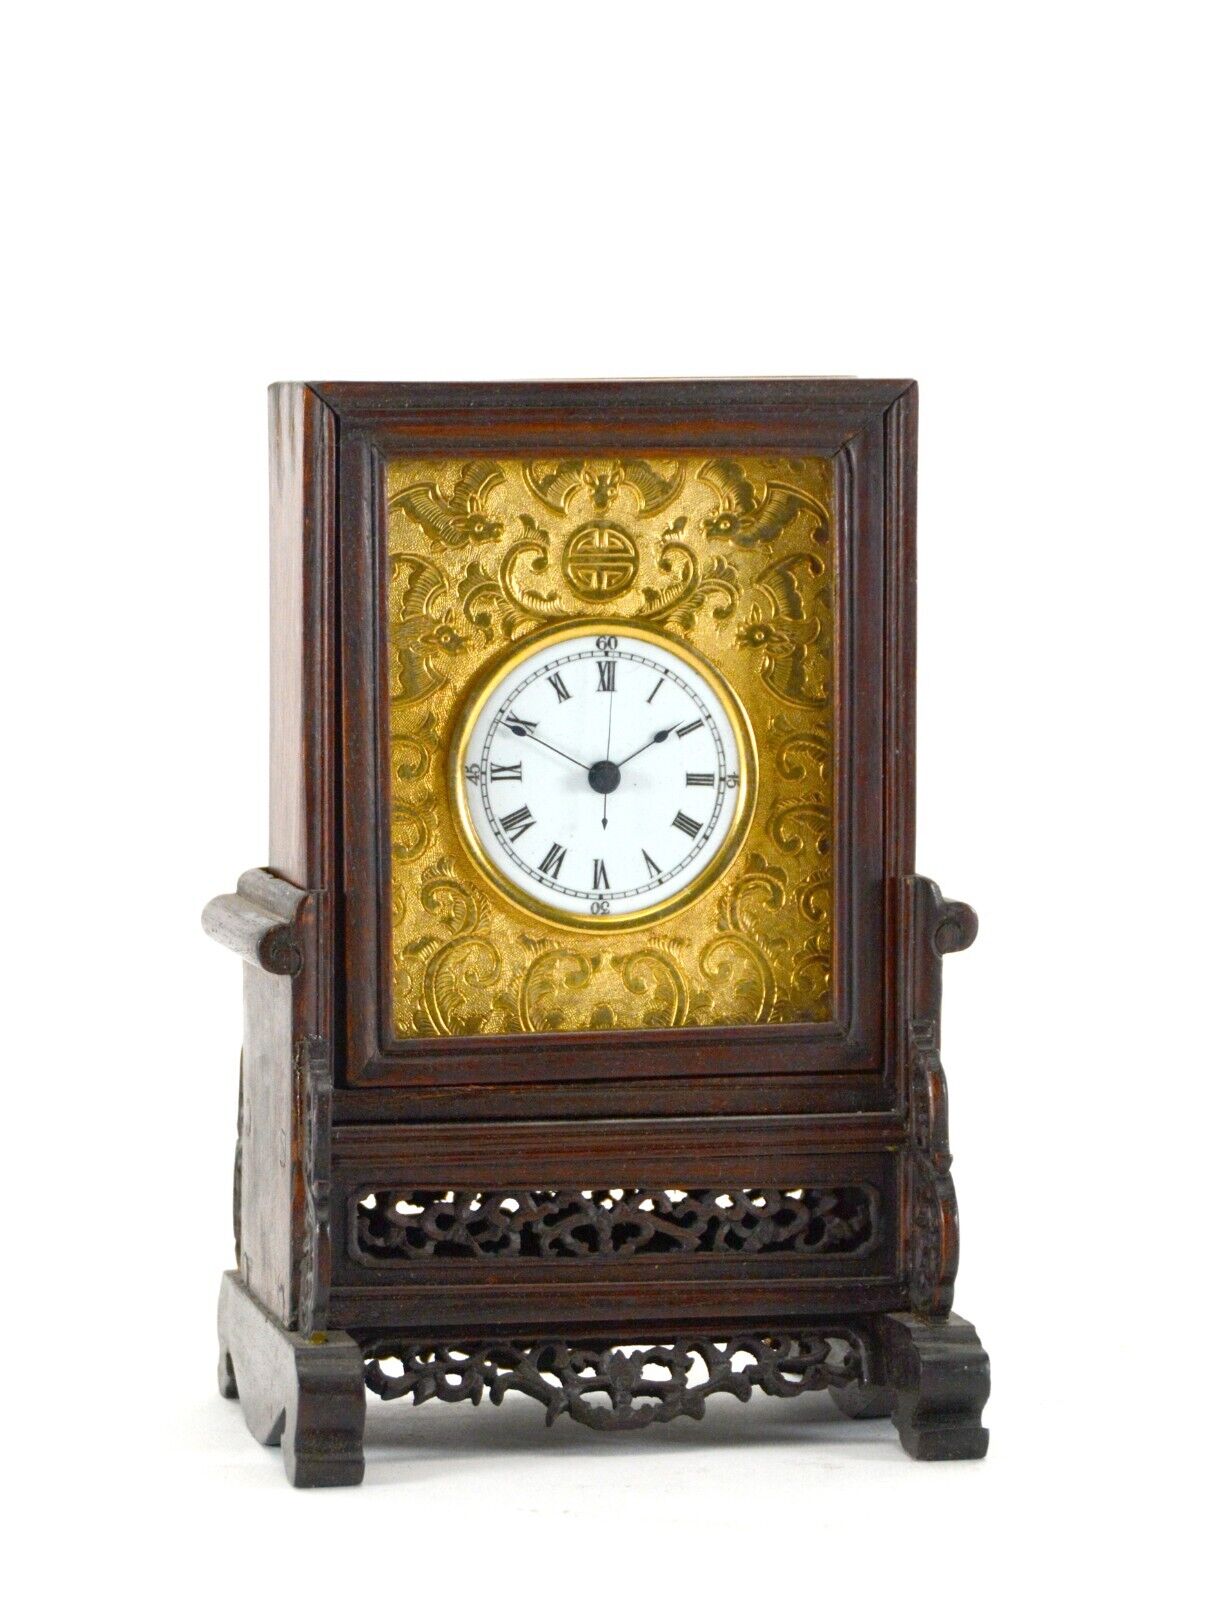 Superb Handcrafted Rosewood Case Engraved Gilt Dial Carved Chinese Bracket Clock